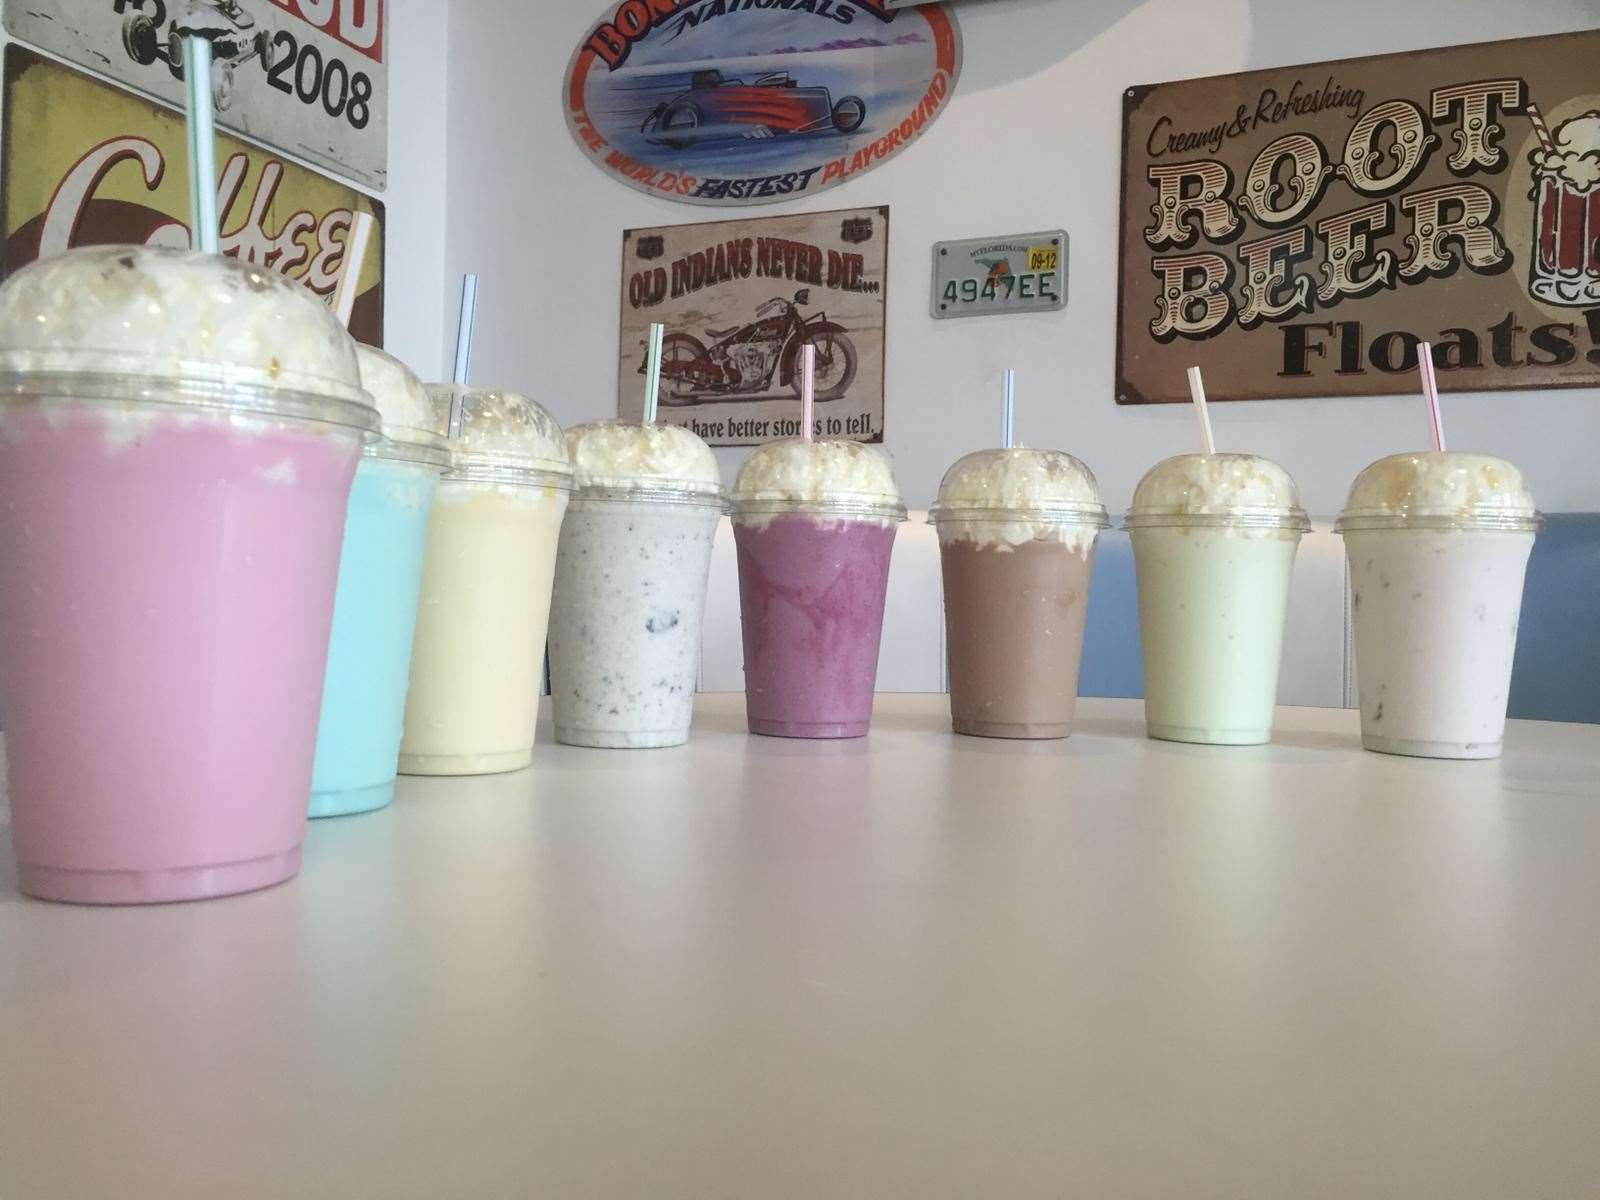 Some of the mouth-watering milkshake options at Hot Rod Diner in Northfleet. Picture: Facebook